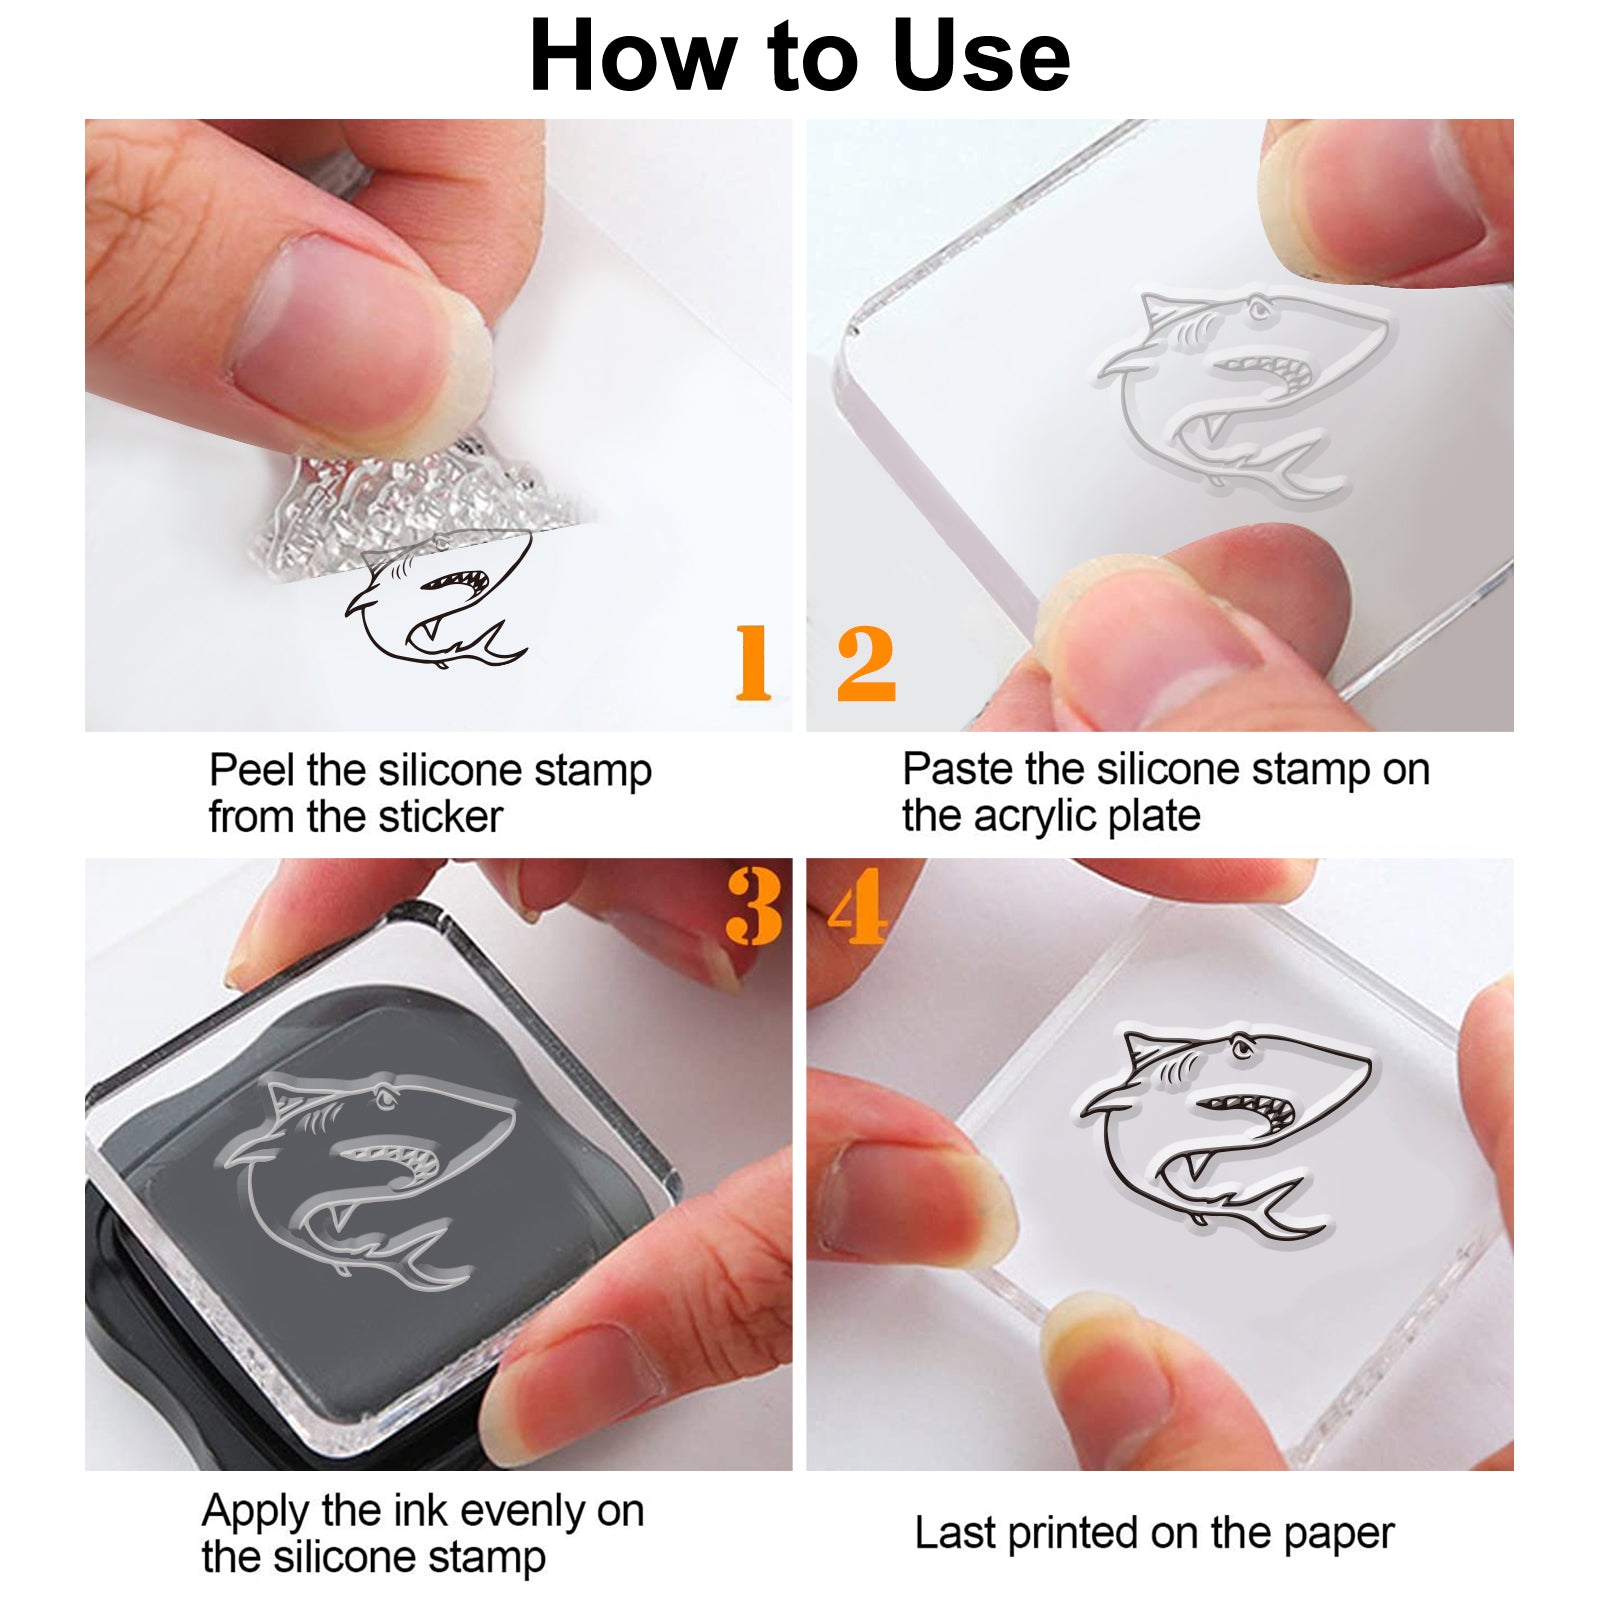 Globleland Ocean, Treasure, Shark Clear Stamps Silicone Stamp Seal for Card Making Decoration and DIY Scrapbooking